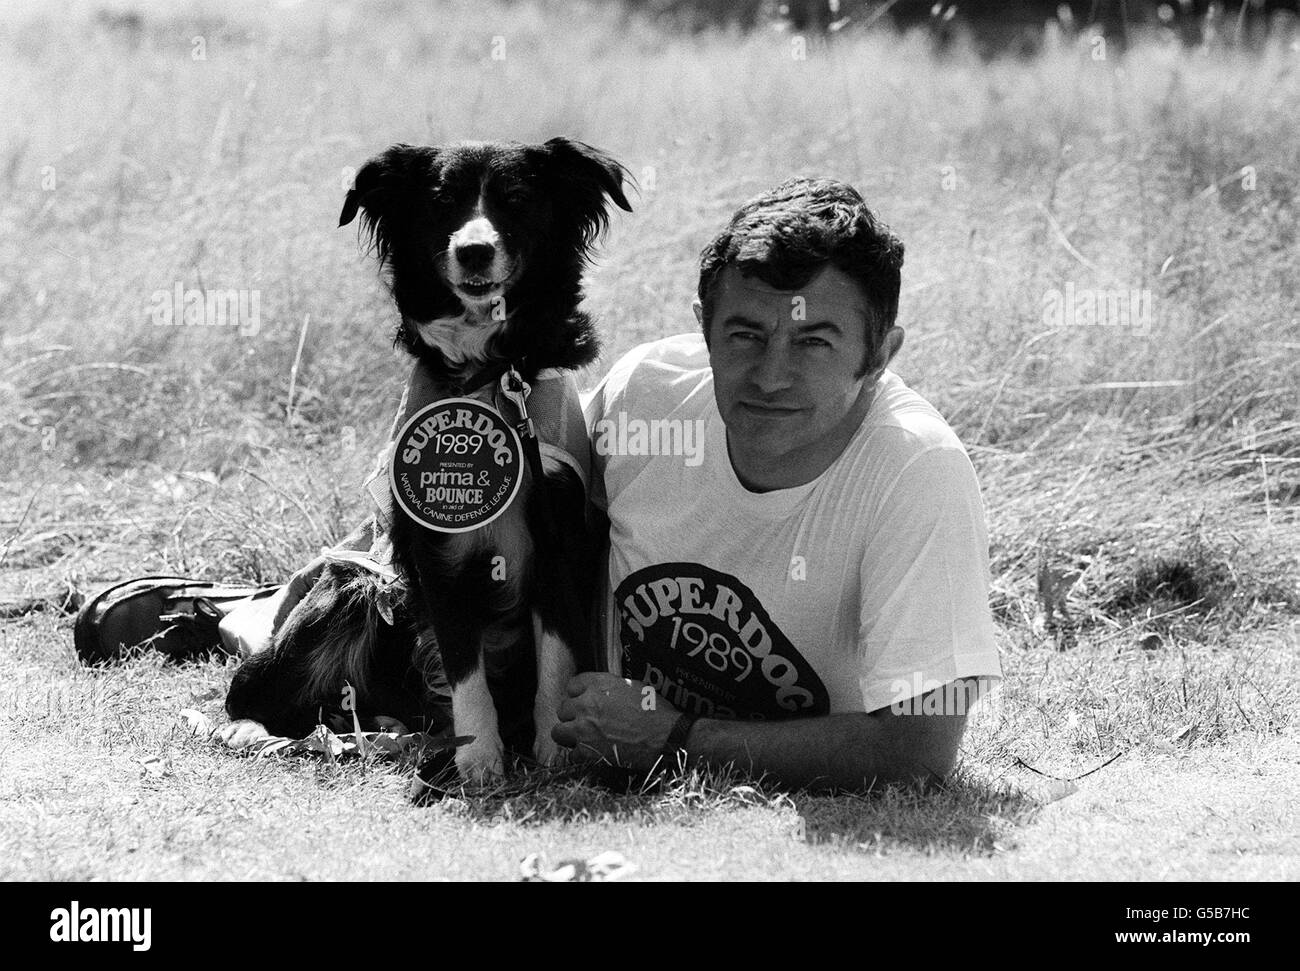 Collie Donna who helped in rescue operations after the Lockerbie Air Crash, with her owner Bill Parr in London after the courageous canine received a 1989 Bounce Superdog Award. Donna was amongst the 50 dogs from the Search and Rescue Dog Association who helped locate bodies, personal effects and clues. Stock Photo